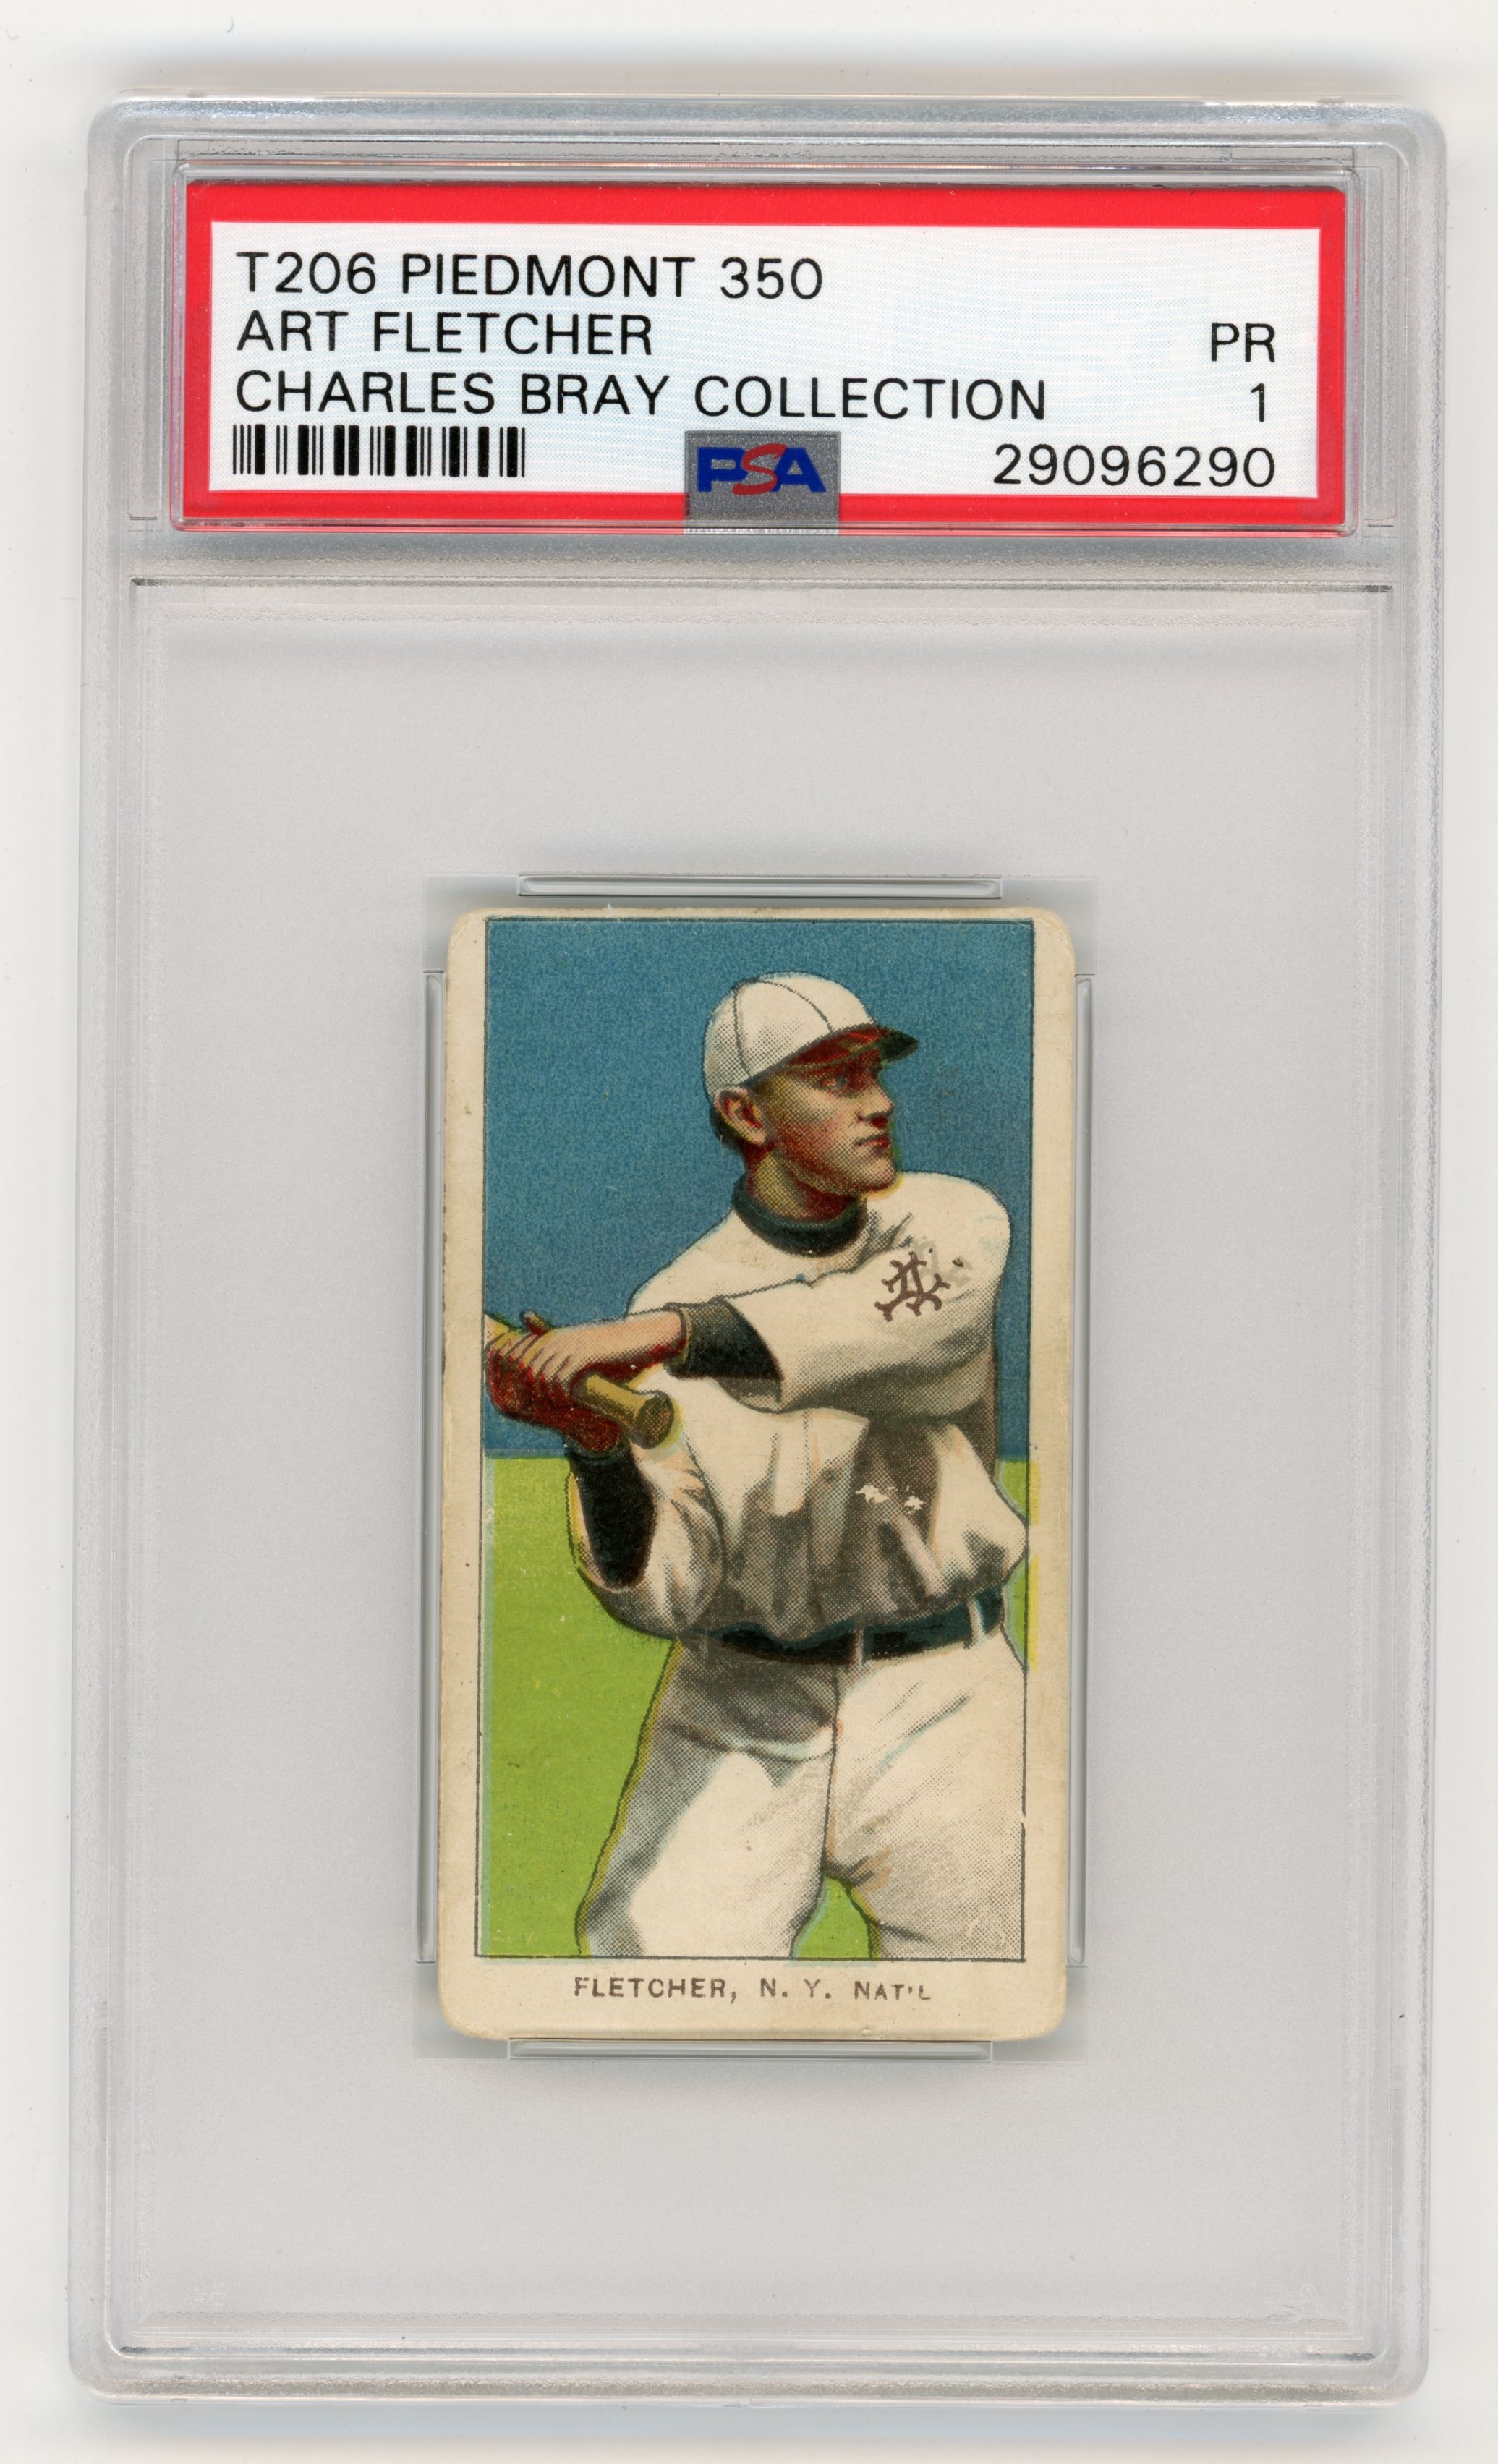 - T206 Piedmont 350 Art Fletcher PSA PR 1 From the Charles Bray Collection.